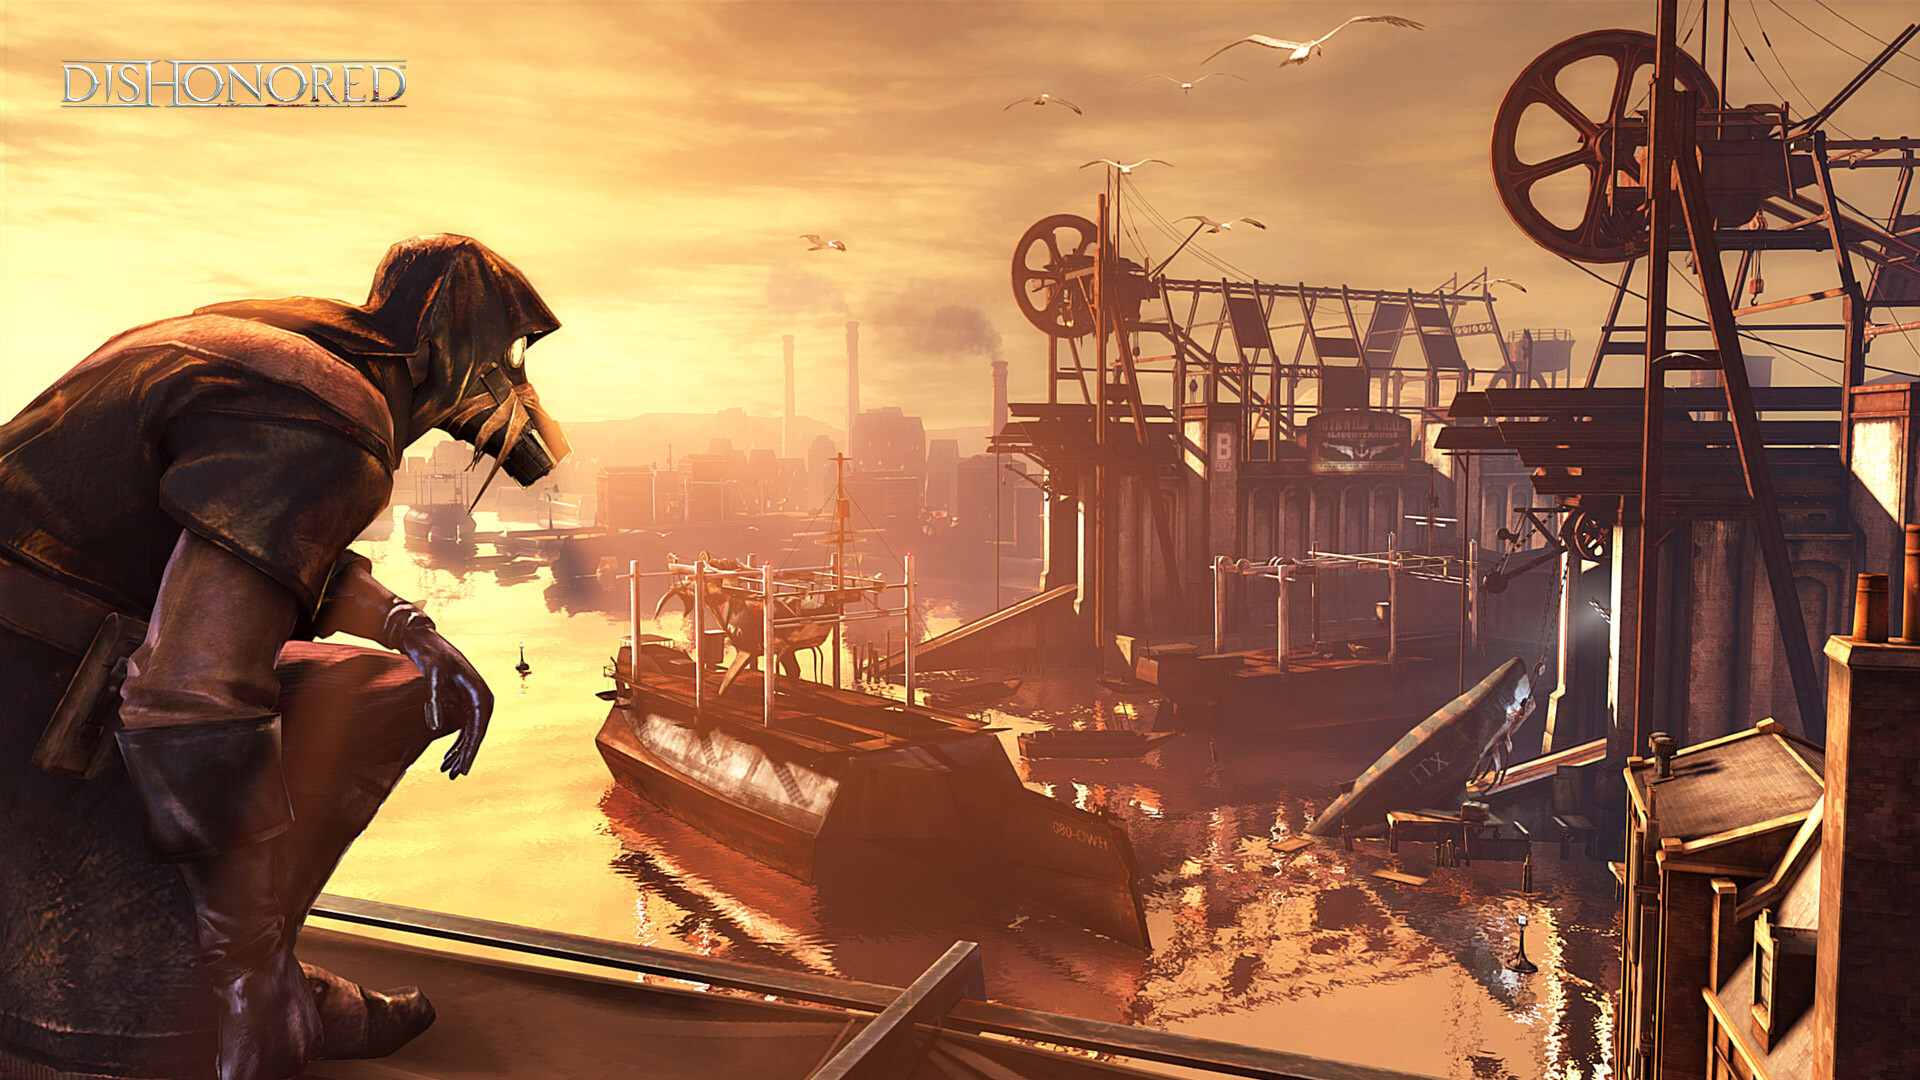 Dishonored: The game played in first person, Bethesda Softworks. 1920x1080 Full HD Wallpaper.